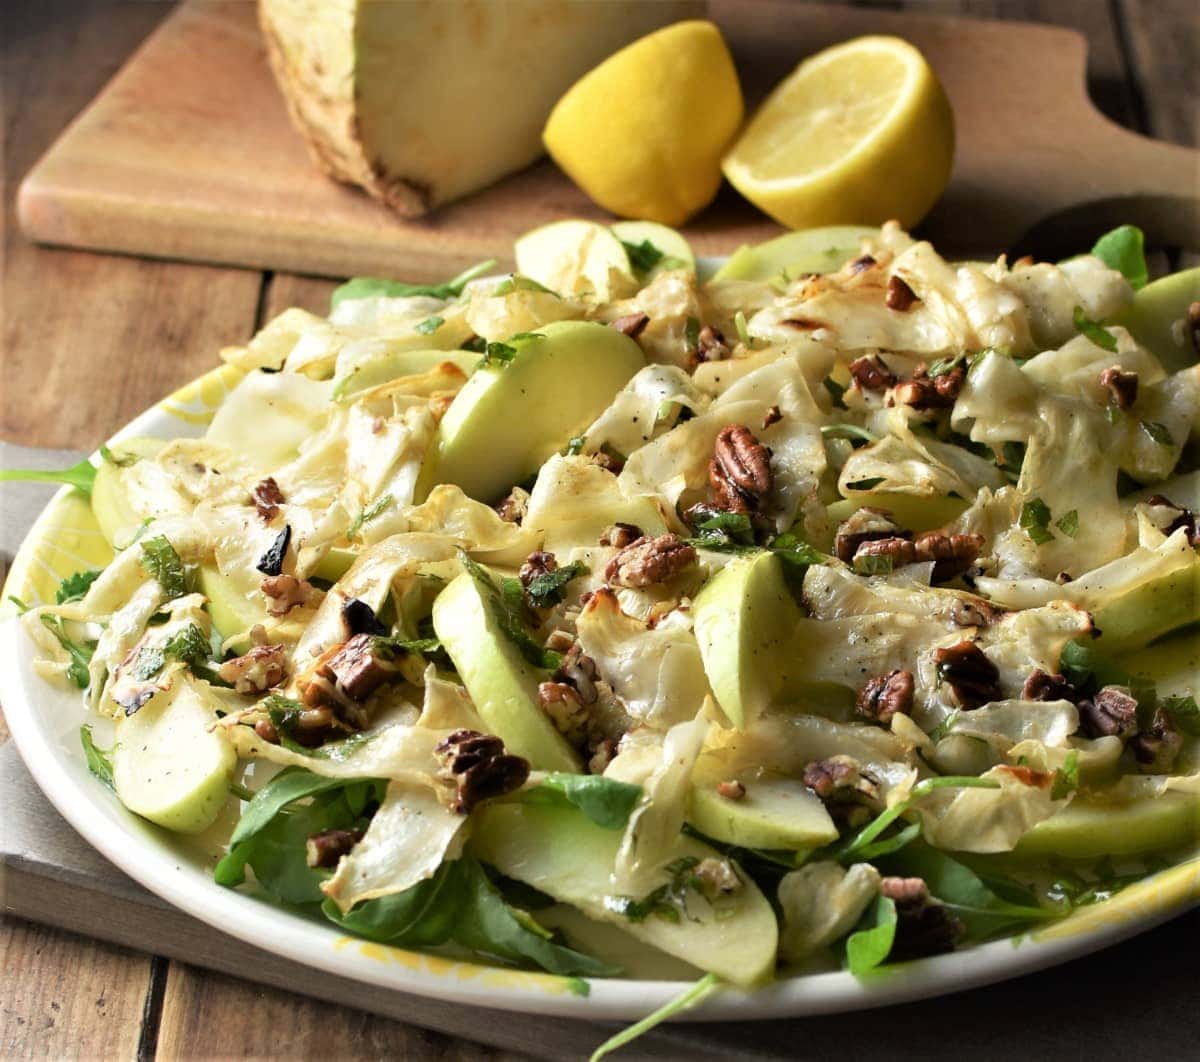 Side view of celeriac apple salad on large plate with lemon in background.